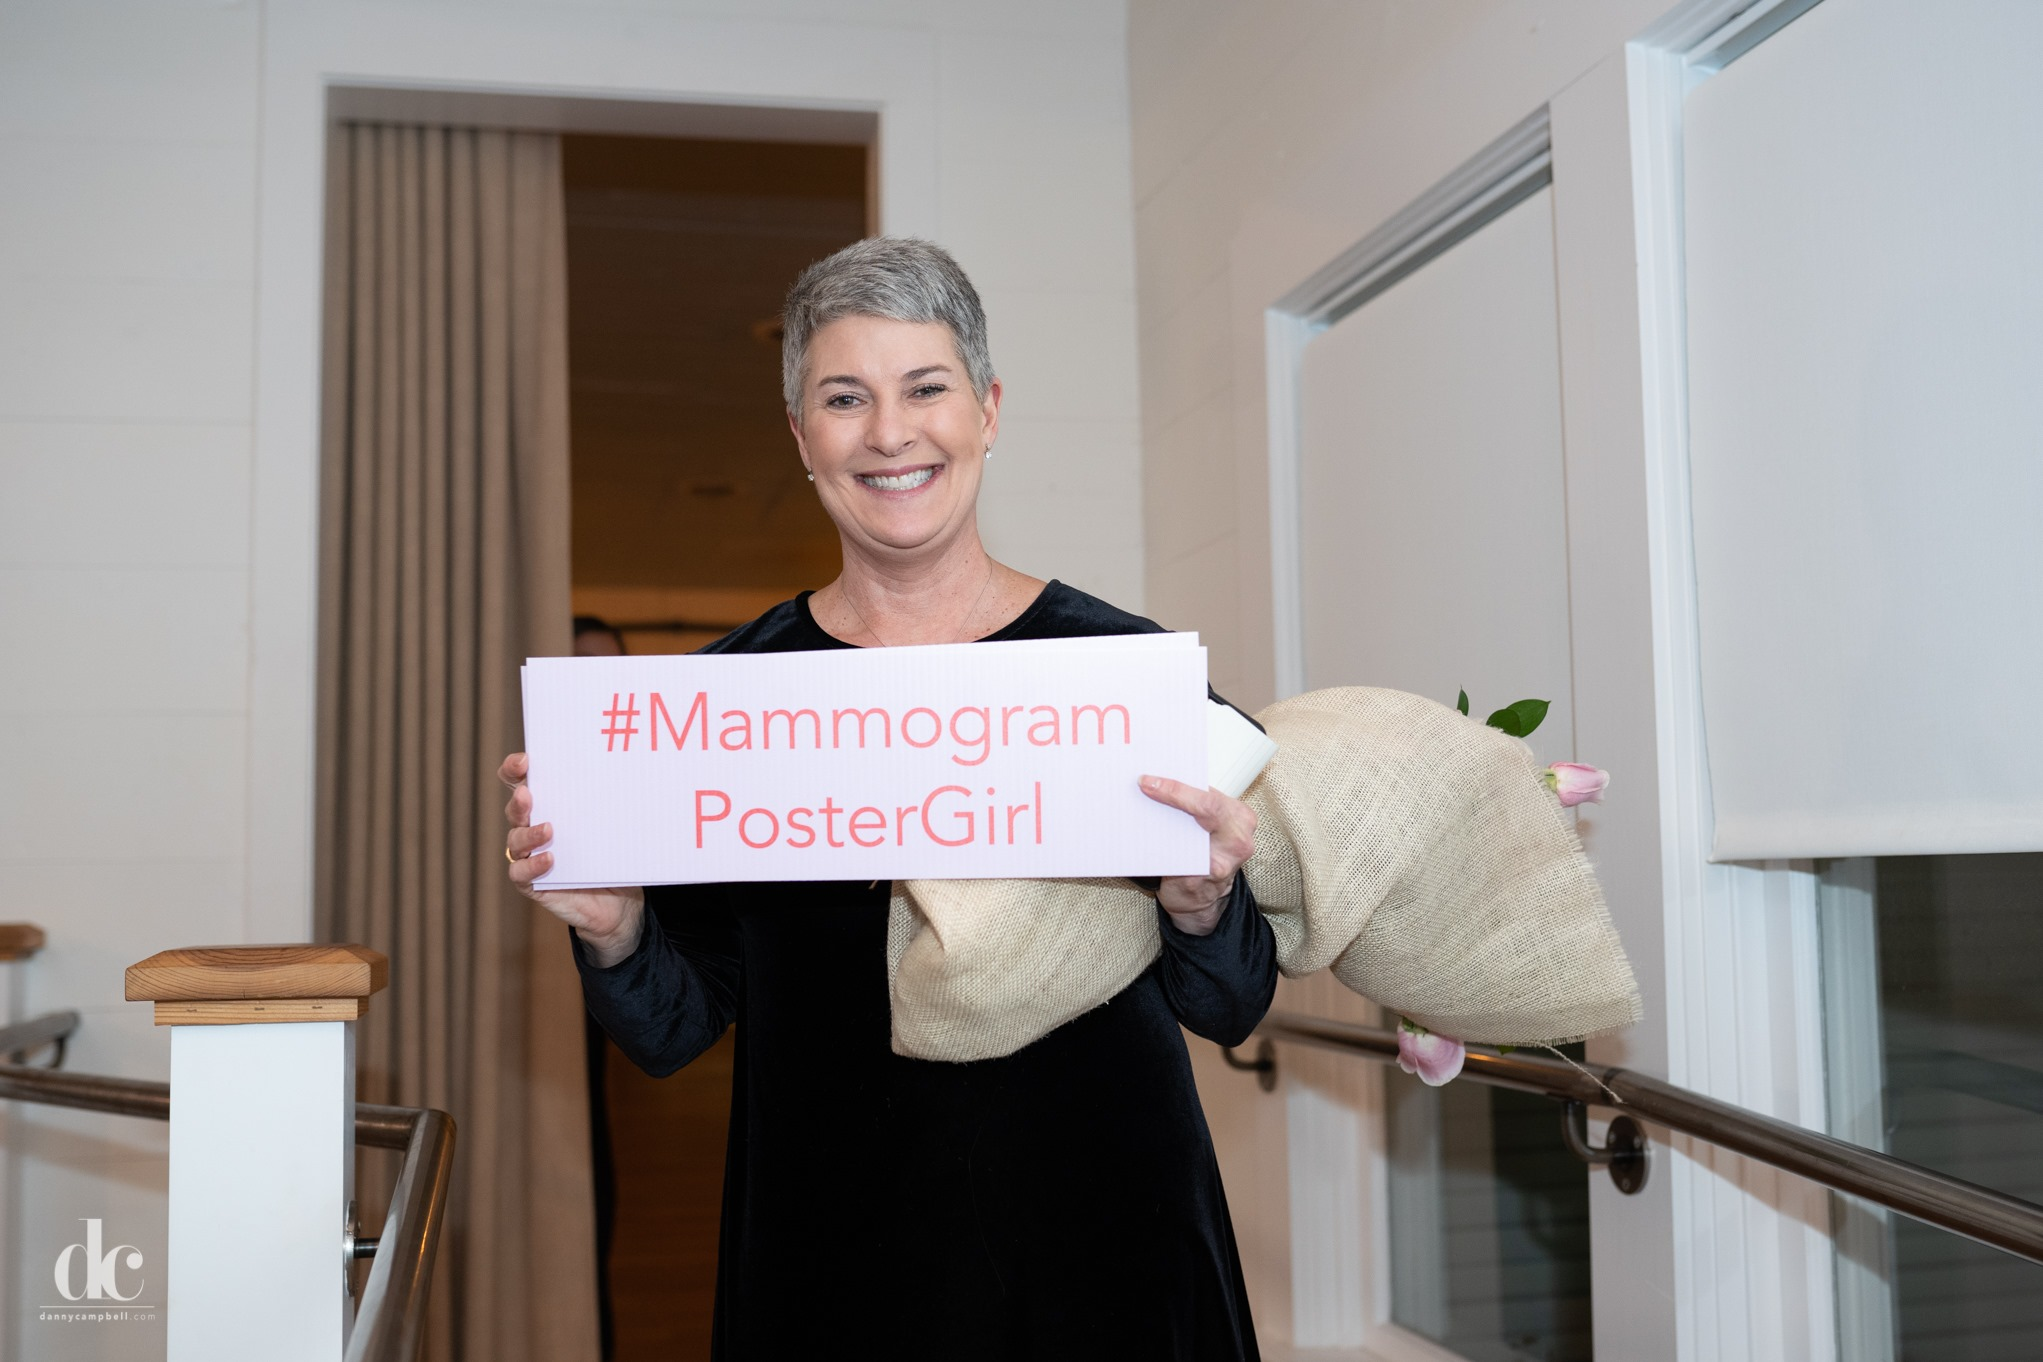 Sheri Mathis, Founder and President of Mammogram Poster Girls. Photo by Danny Campbell.